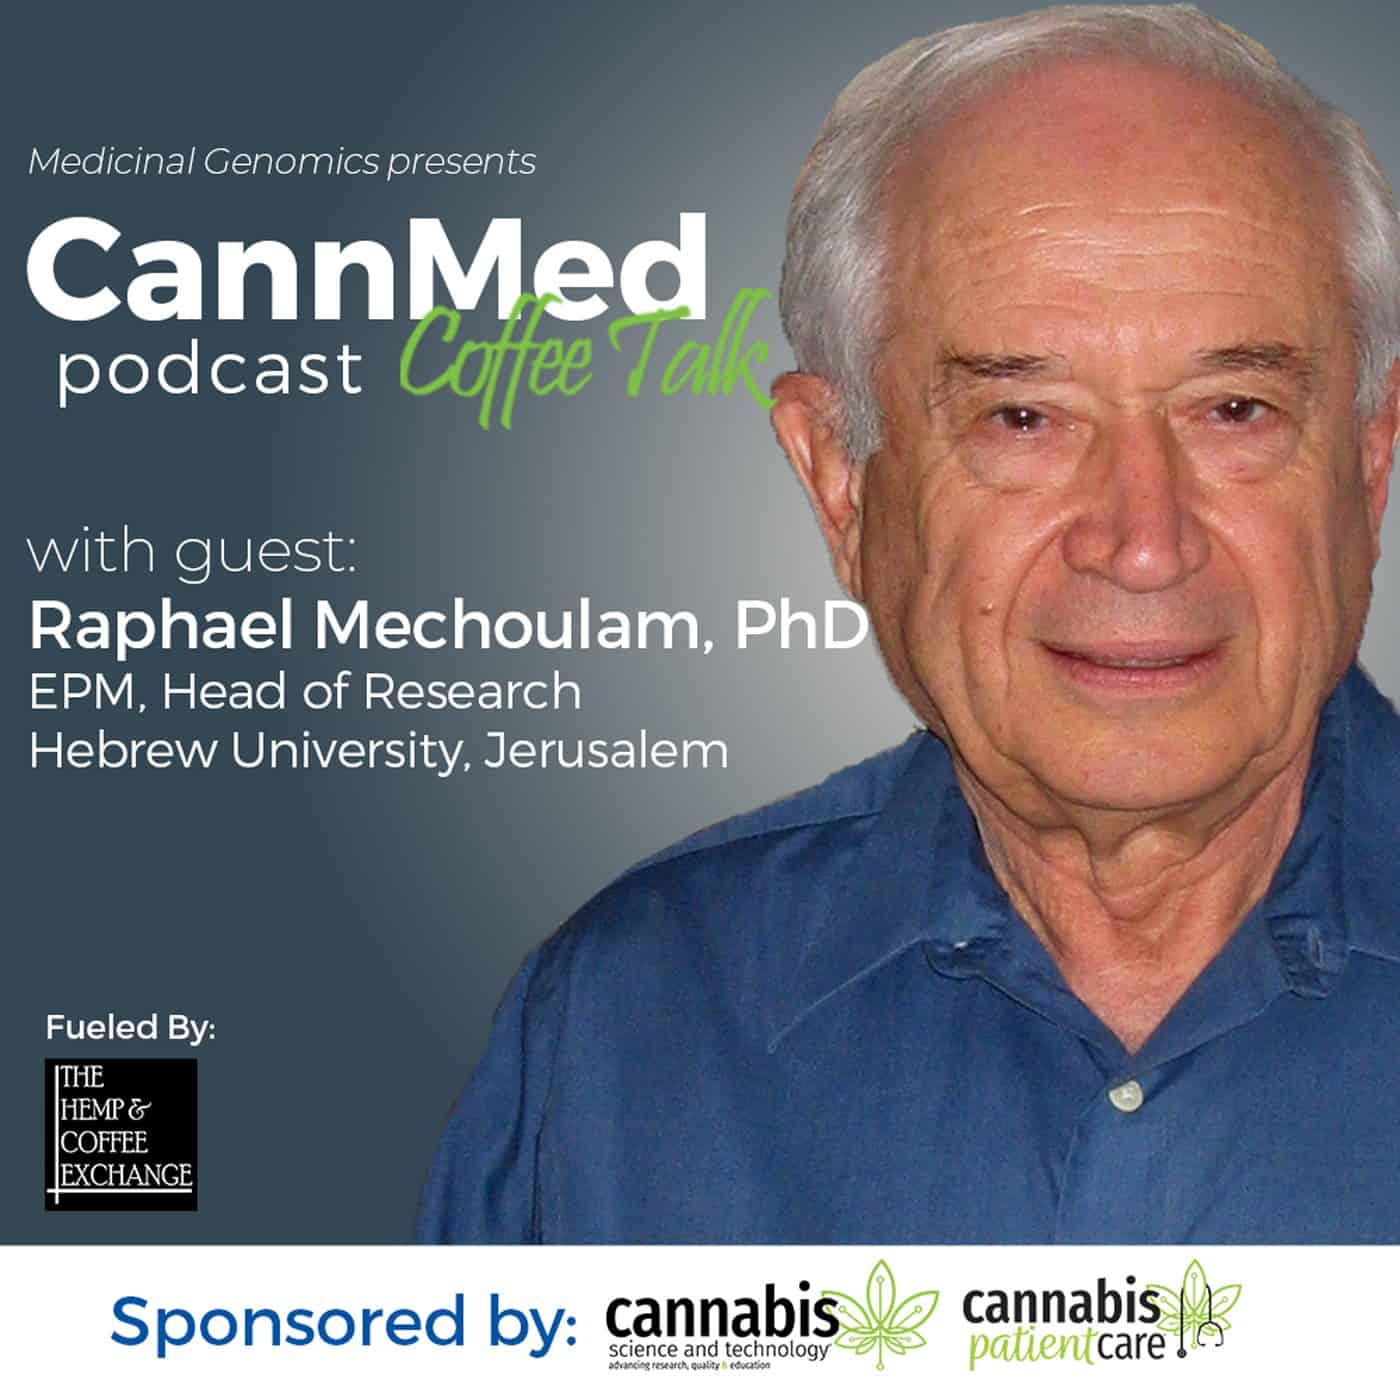 Featured image for “Cannabis Research Past, Present, & Future with Raphael Mechoulam, PhD”